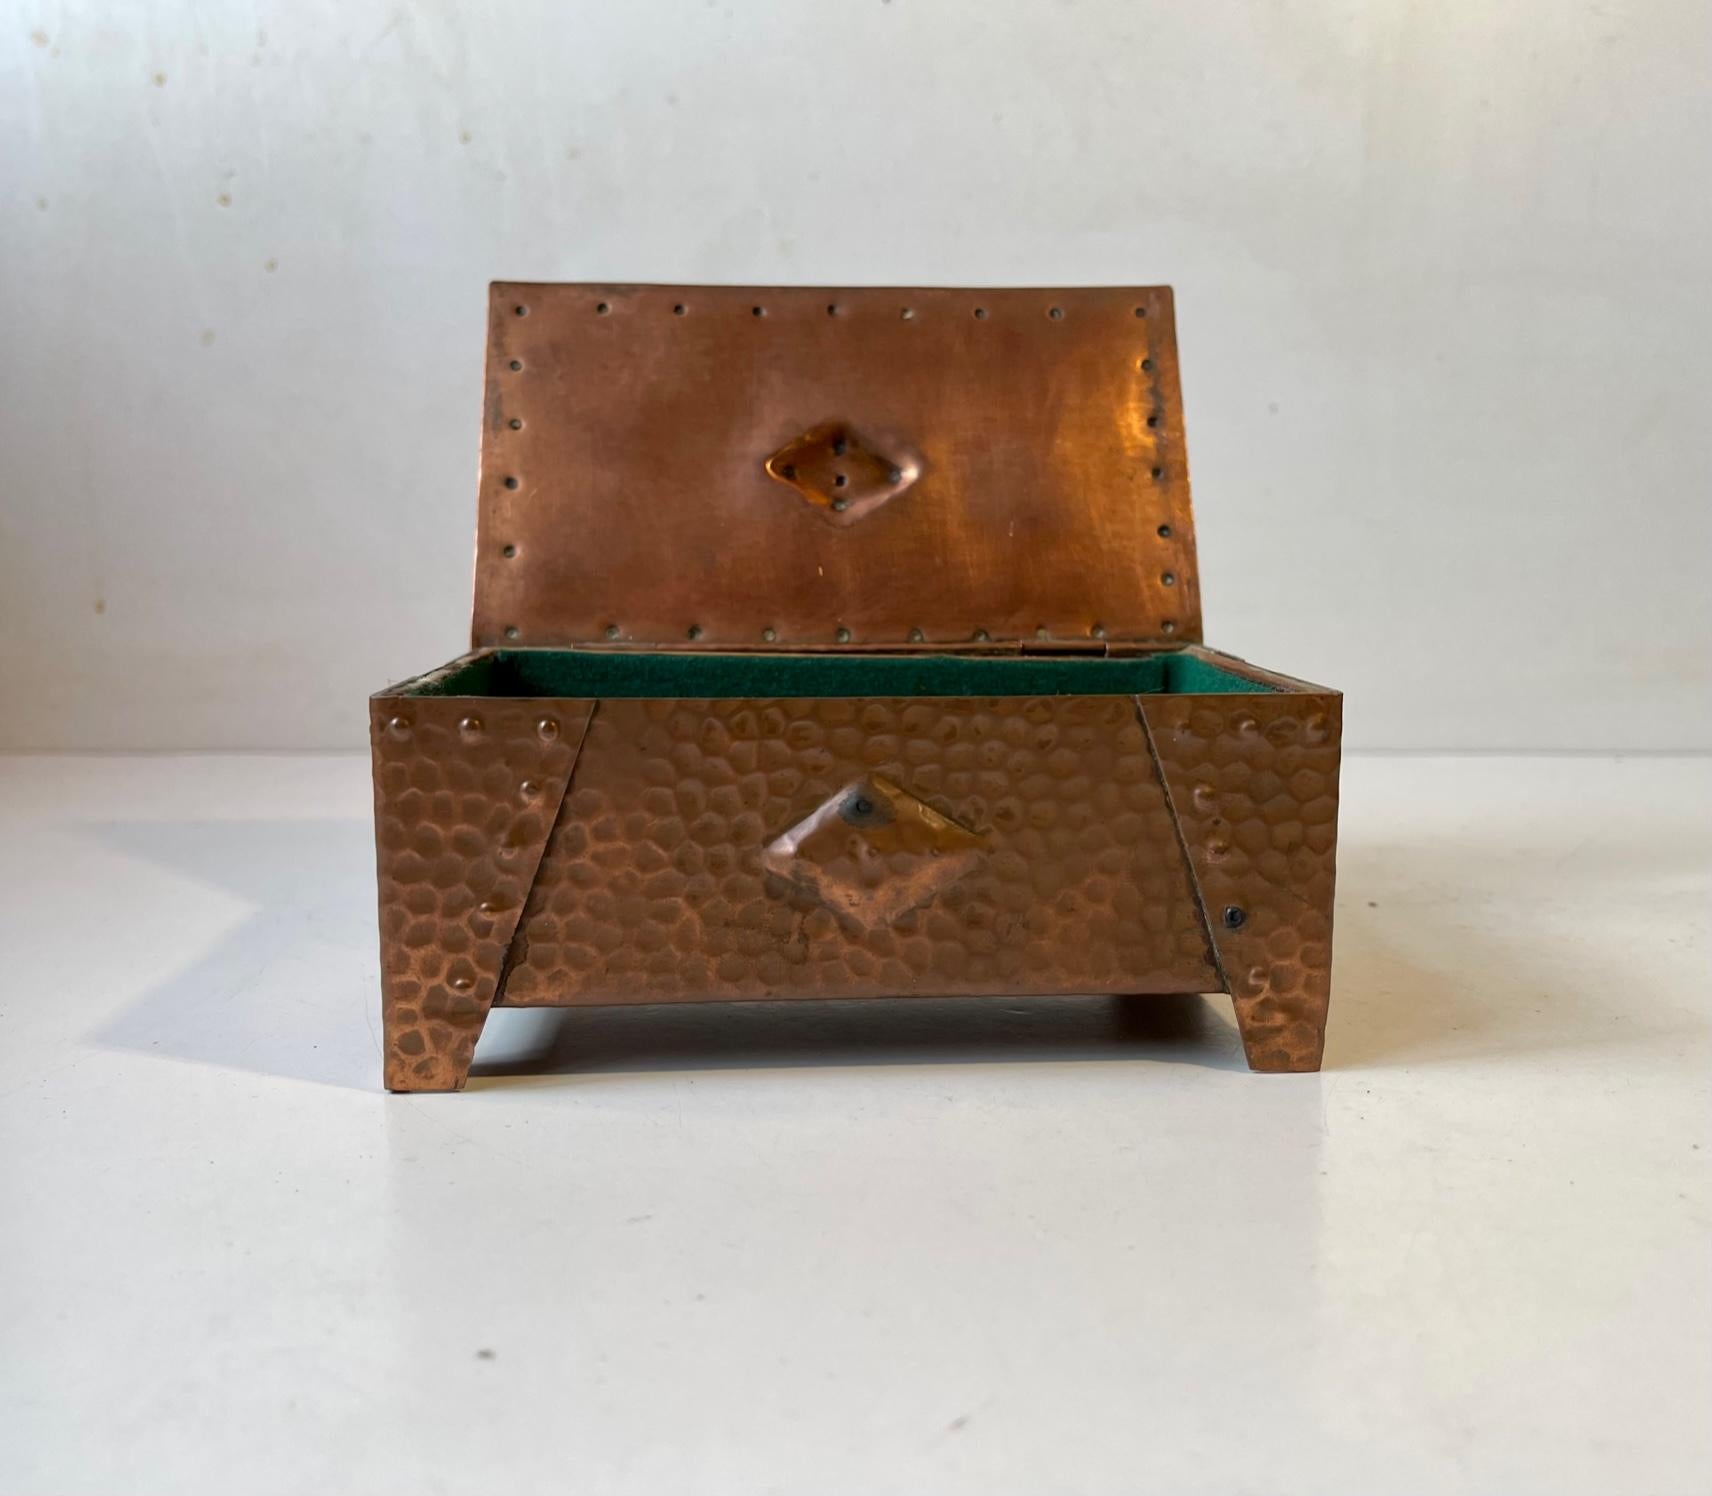 A wellmade and beautifully patinated box in hammered copper. Suitable for Jewelry or small personal items. Distinct brutalist styling with architectural Art Deco element. It was made anonymously in Scandinavia circa 1930-40. Measurements: W: 15 cm,